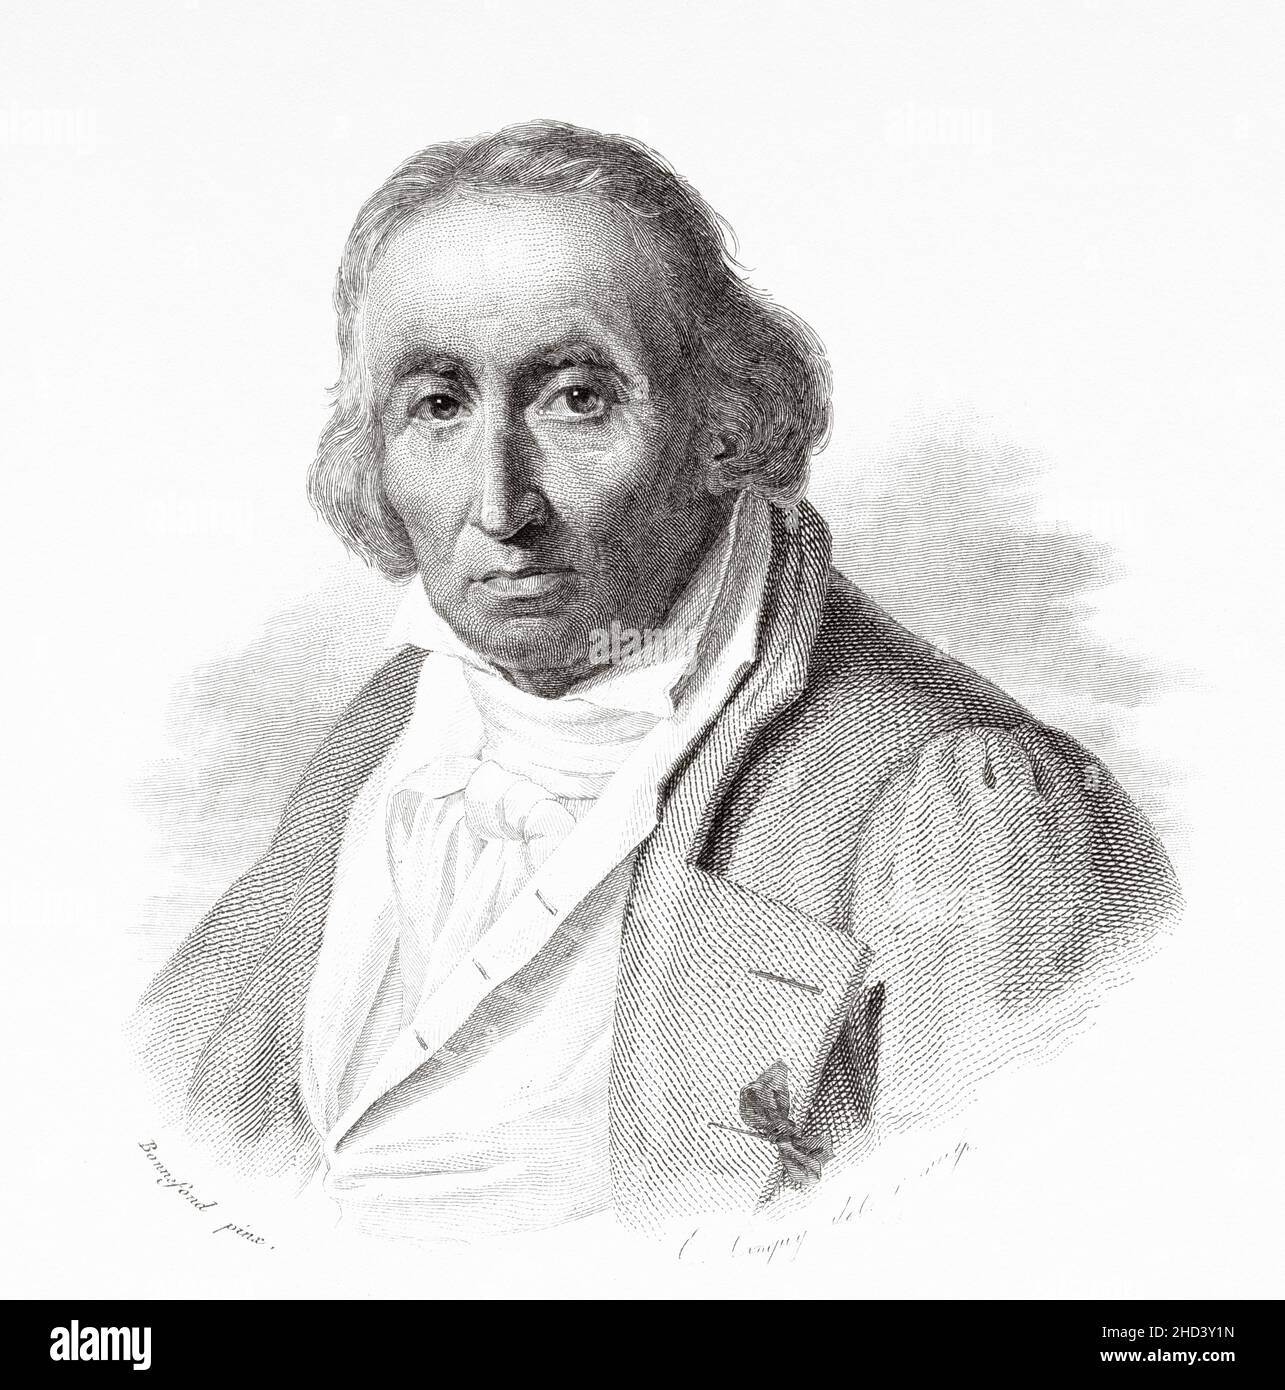 Jacquard. Joseph Marie Charles (1752-1834) was a French weaver and merchant. He played an important role in the development of the earliest programmable loom the Jacquard loom. France. Europe. Old 19th century engraved illustration from Portraits et histoire des hommes utile by Societe Montyon et Franklin 1837 Stock Photo